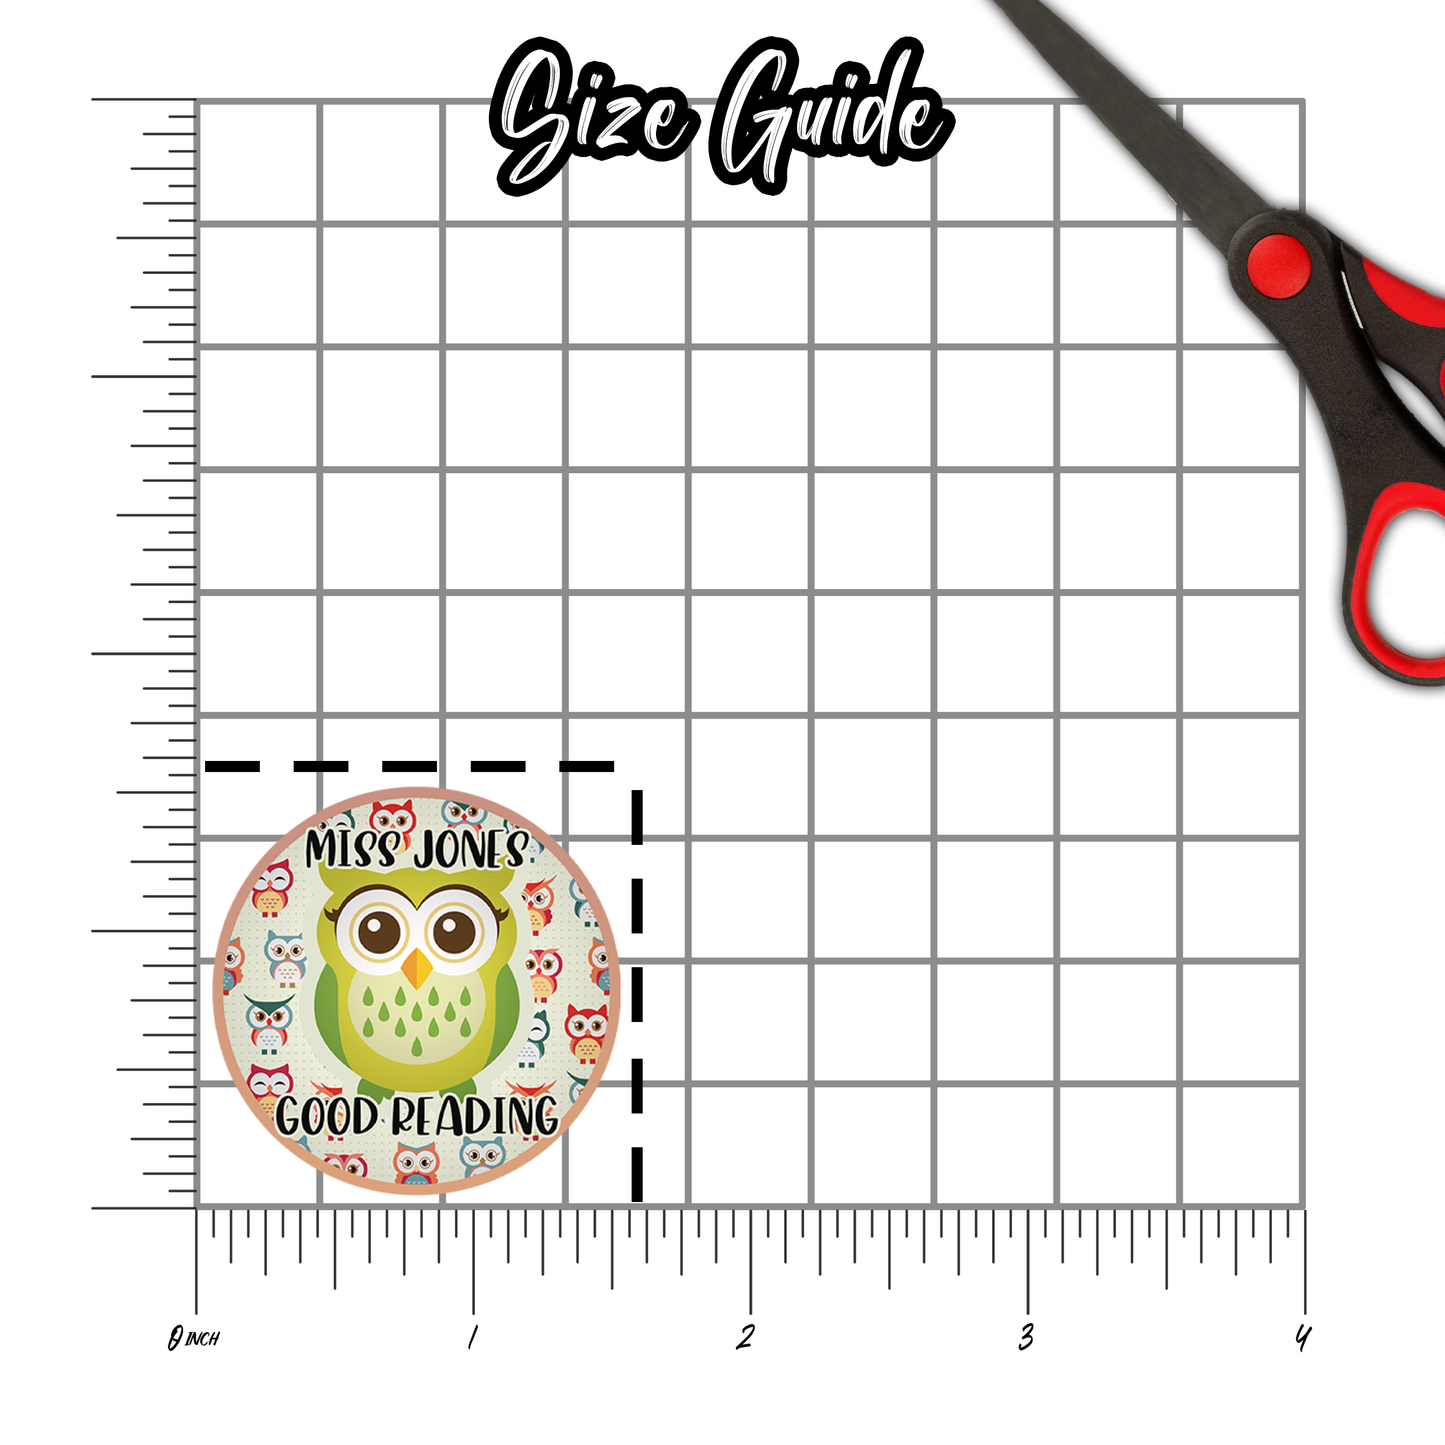 Owls Personalised Teacher Stickers